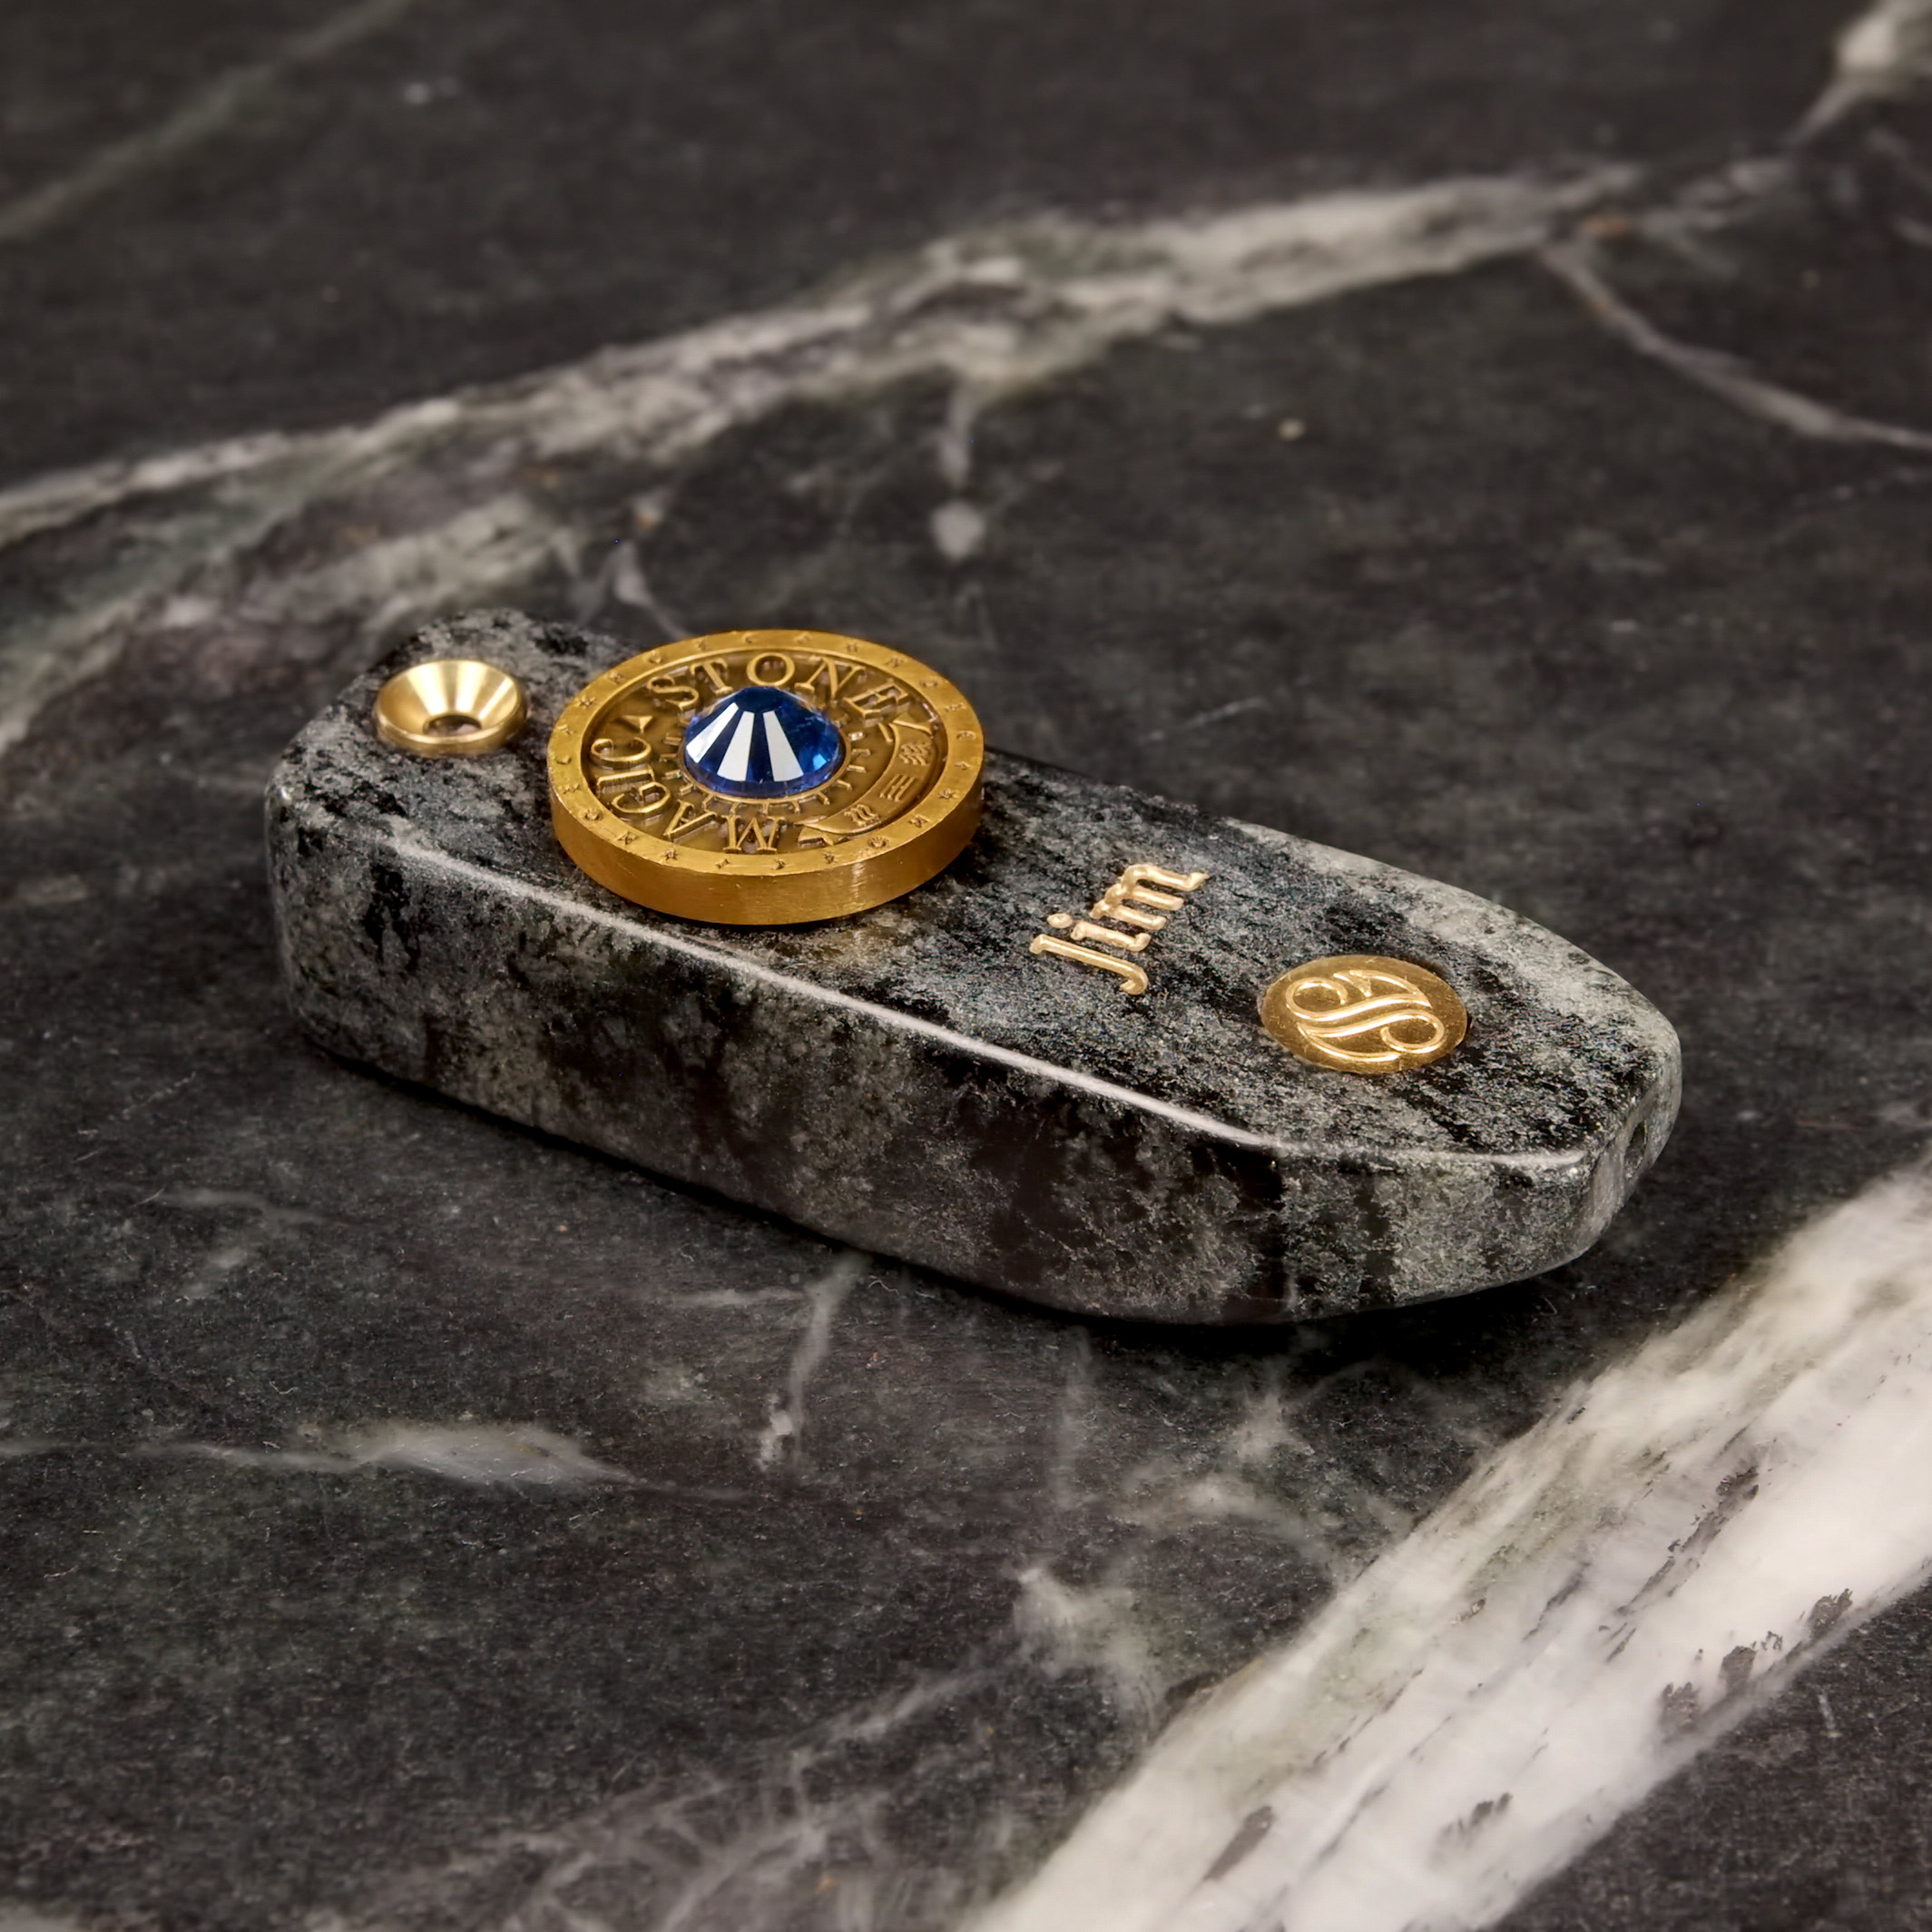 MagicStone Odyssey2 heat-don't-burn cannabis instrument soapstone with custom engraving personalization and optional gemstone coin cap.